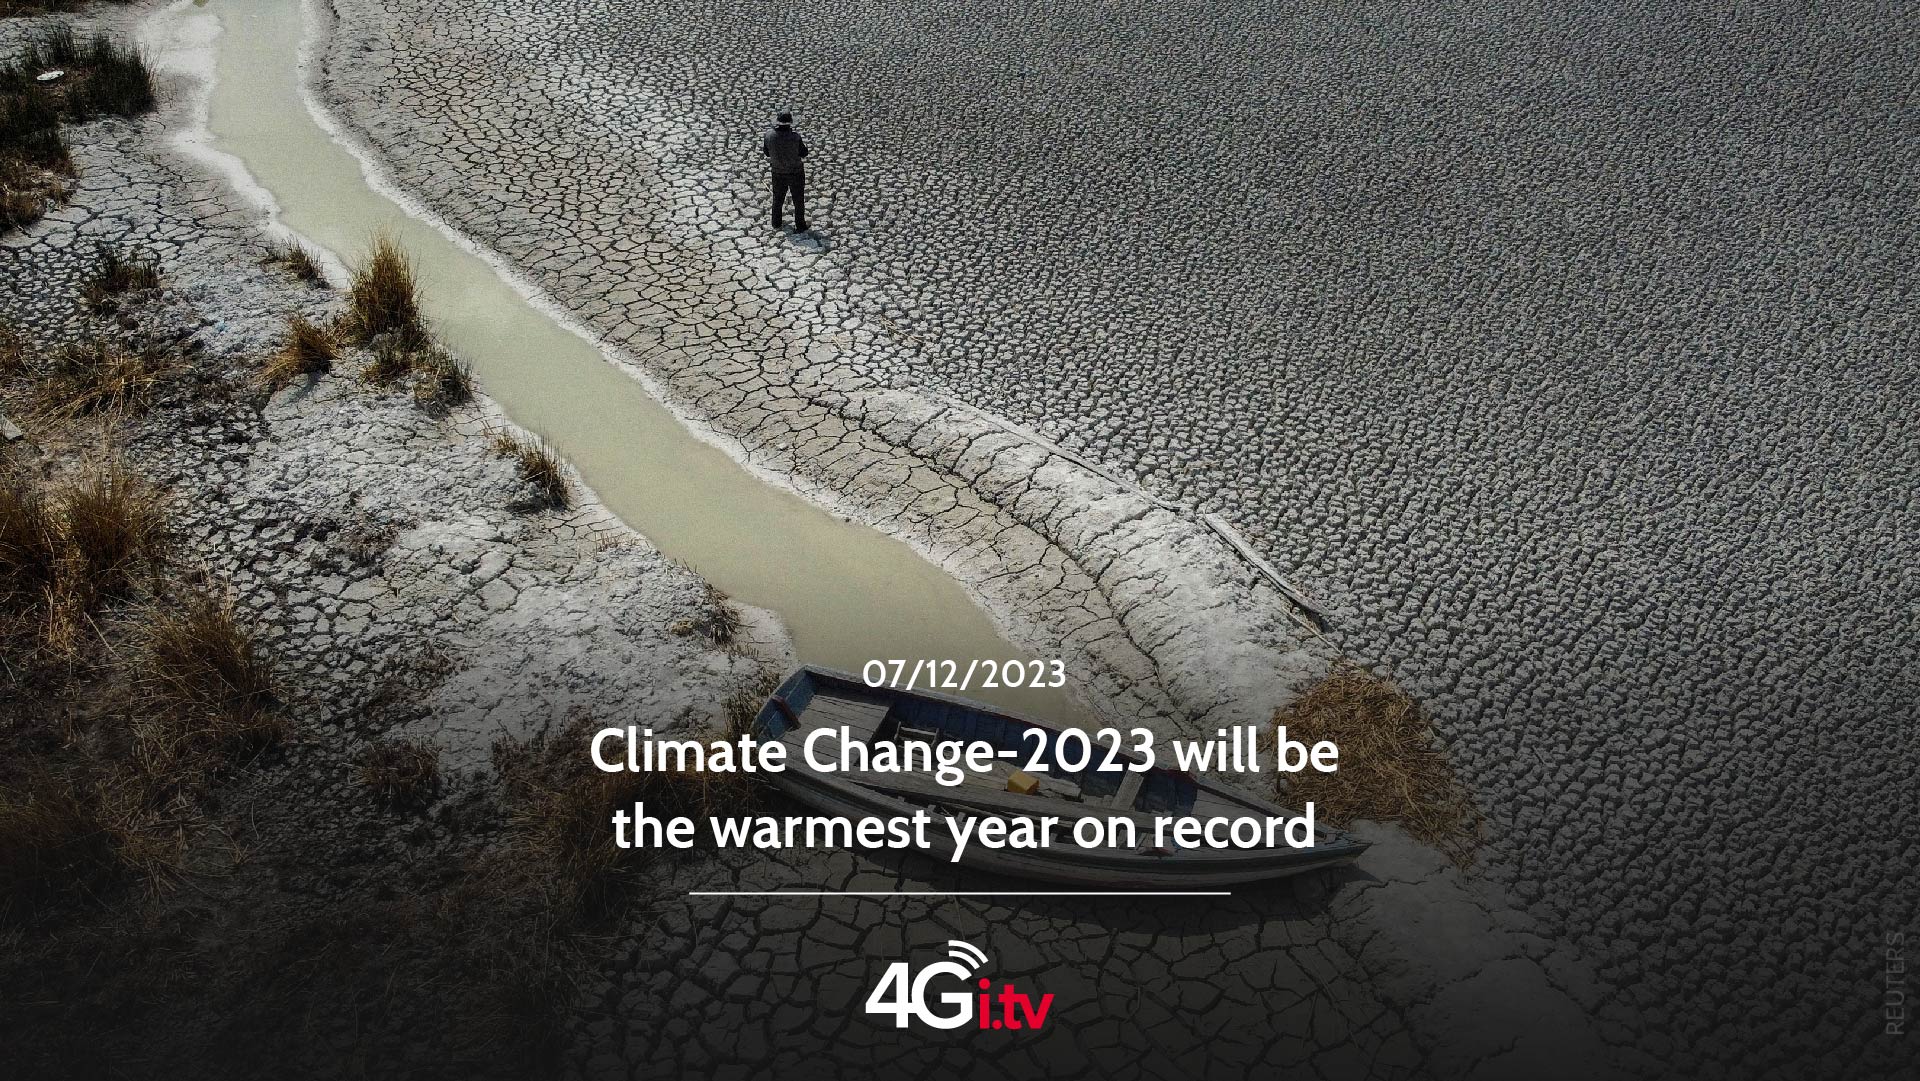 Подробнее о статье Climate Change-2023 will be the warmest year on record